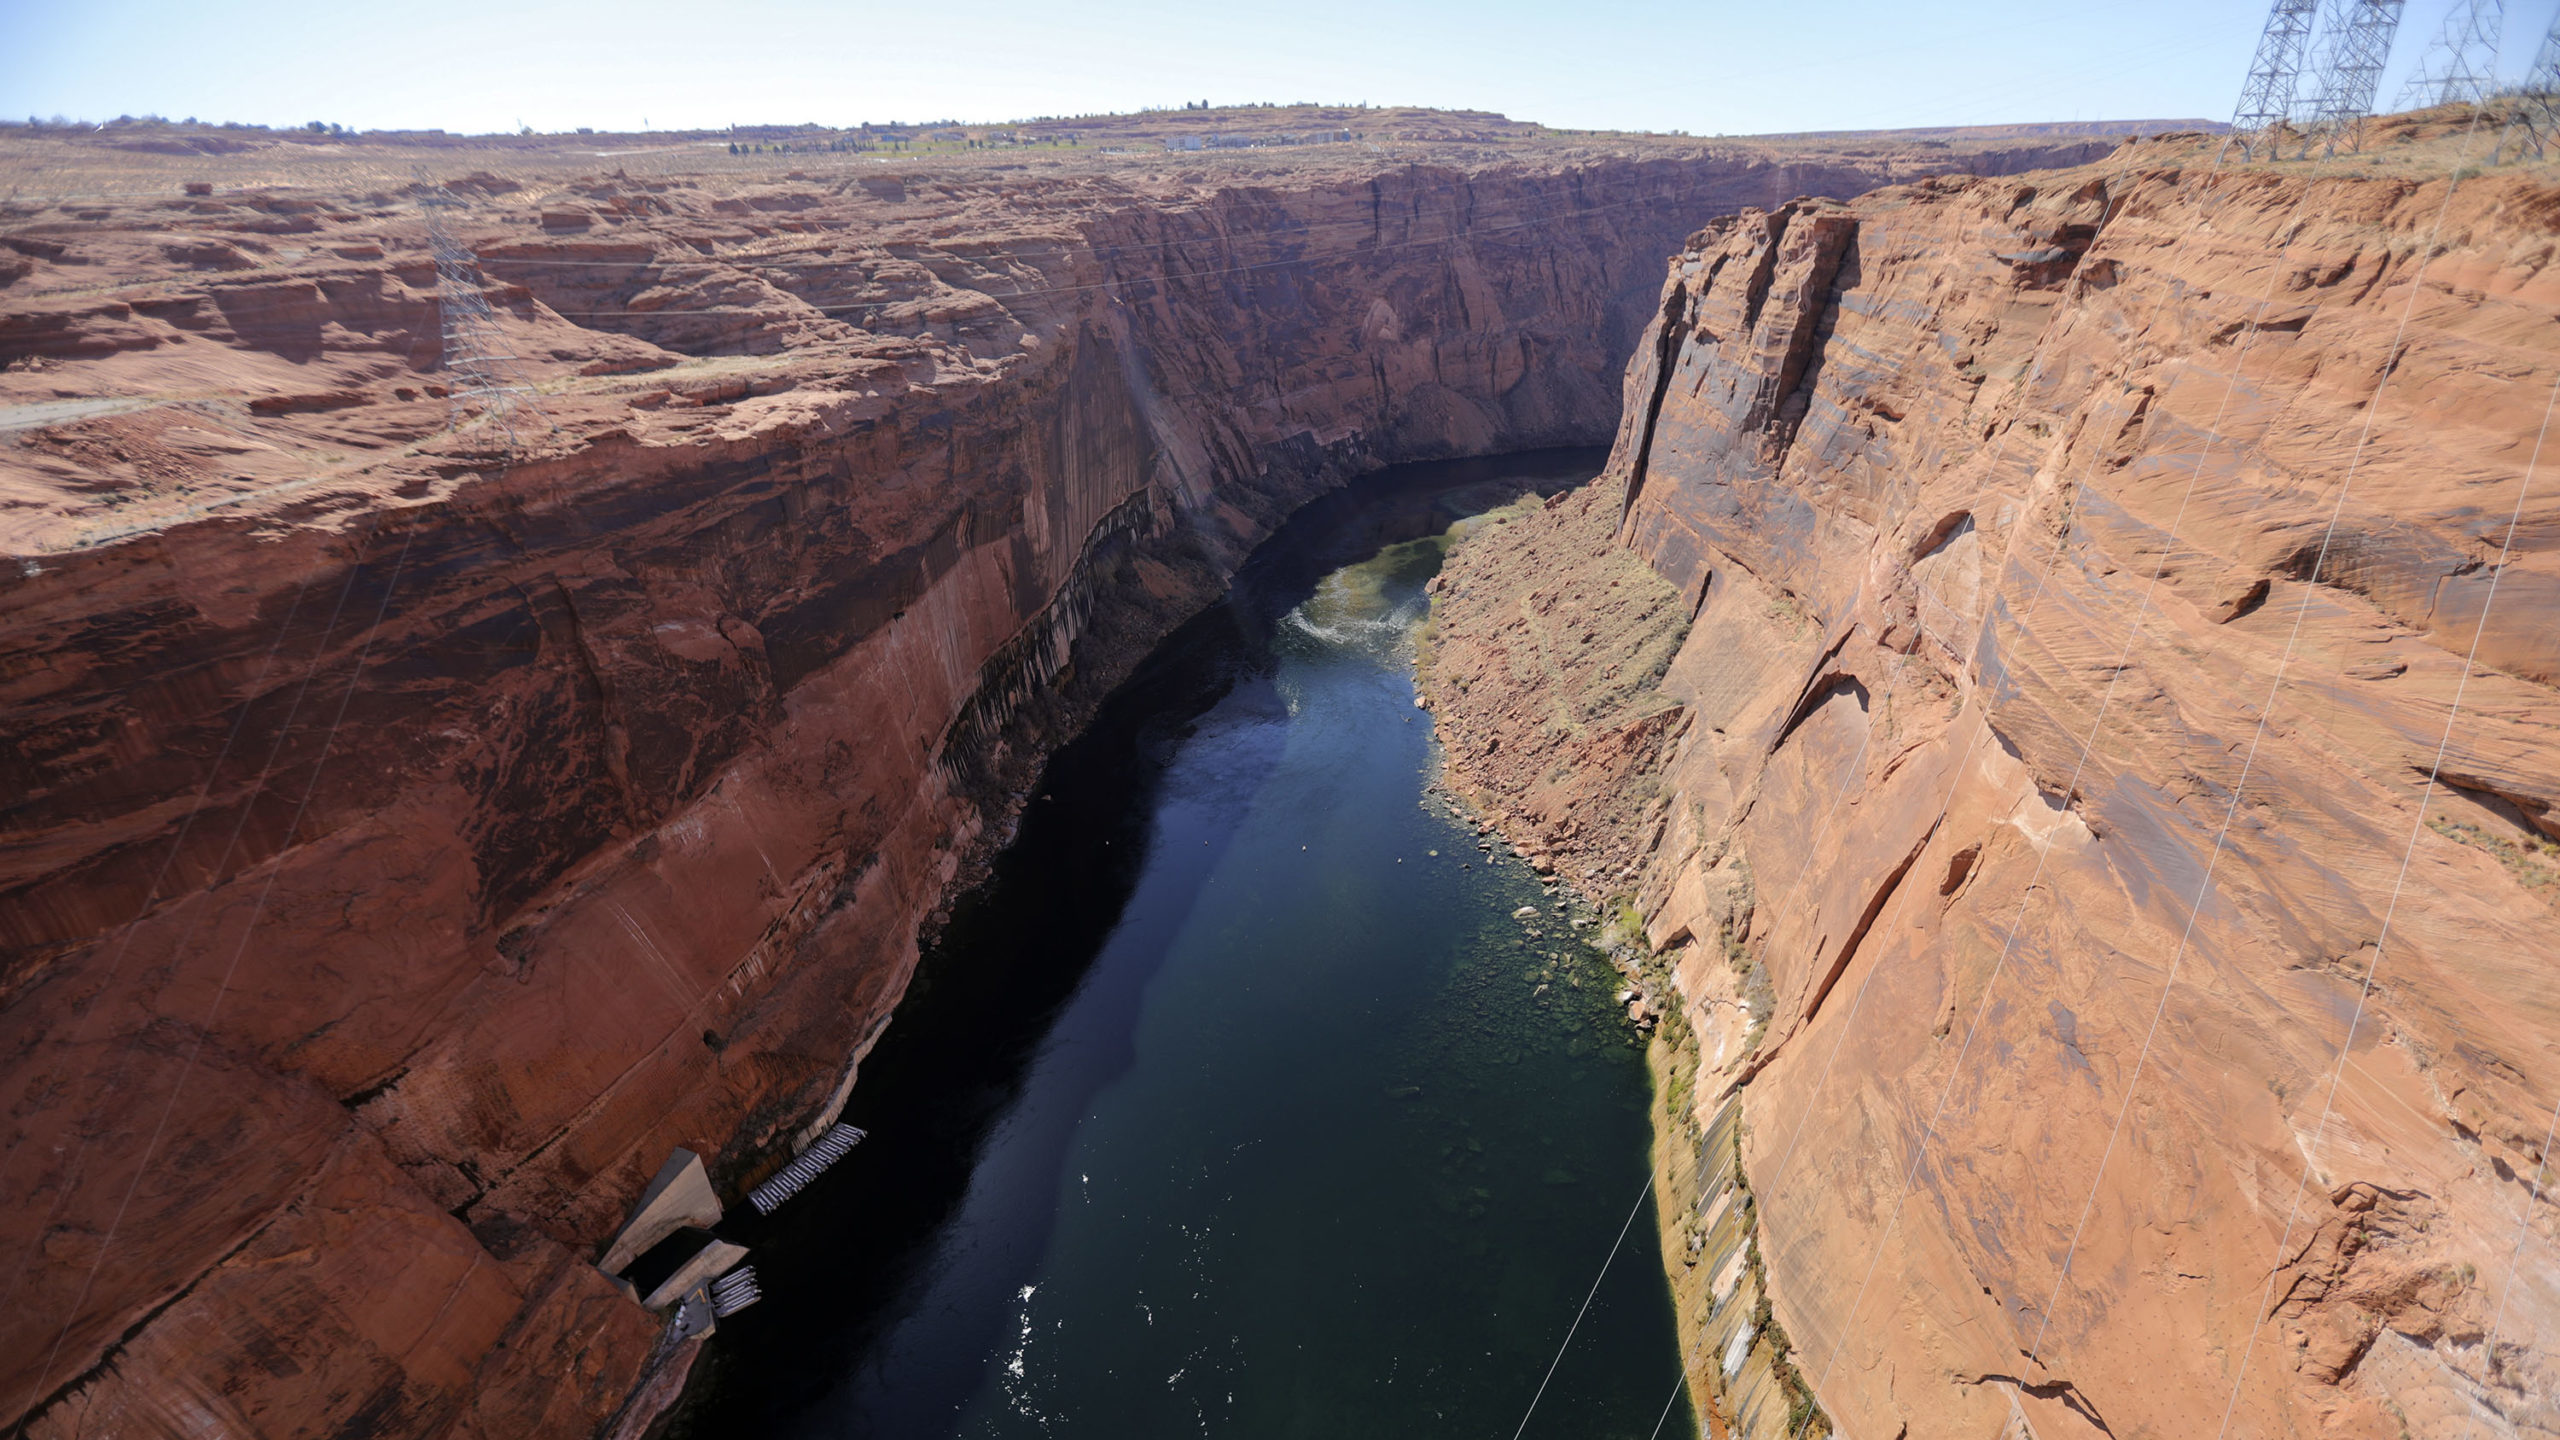 Colorado river is pictured, its water supplies Utah but it is running out...